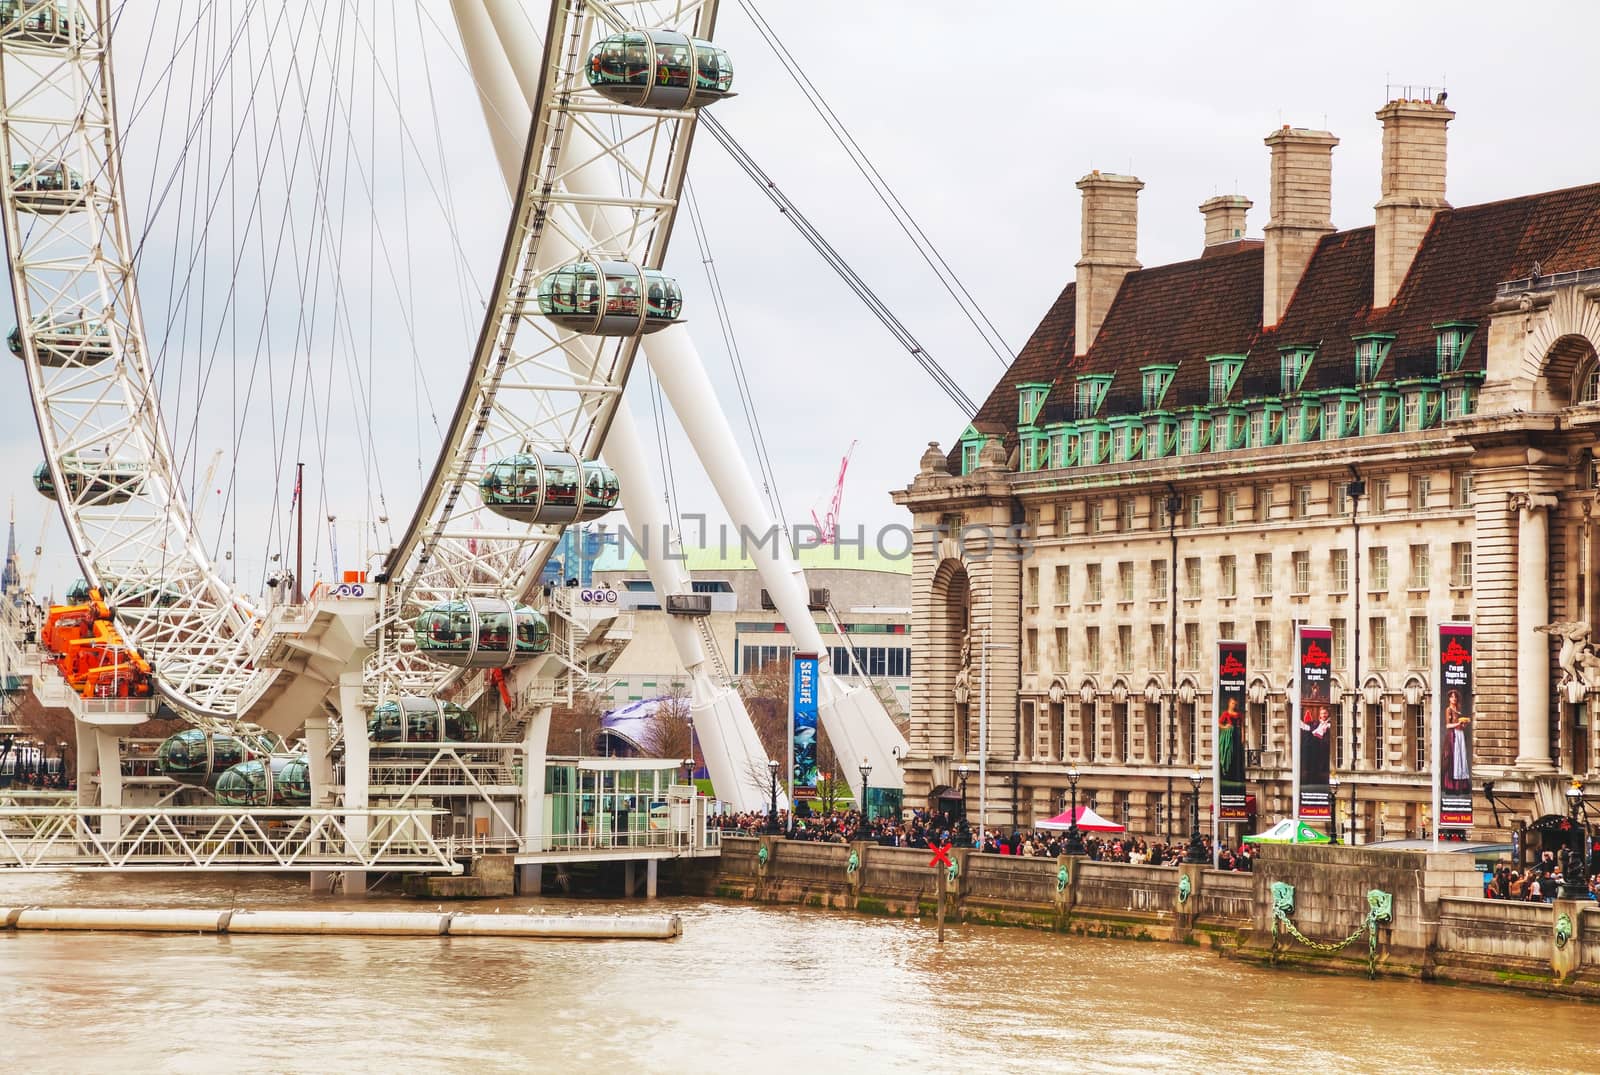 LONDON - APRIL 4: The London Eye Ferris wheel on April 4, 2015 in London, UK. The entire structure is 135 metres tall and the wheel has a diameter of 120 metres.